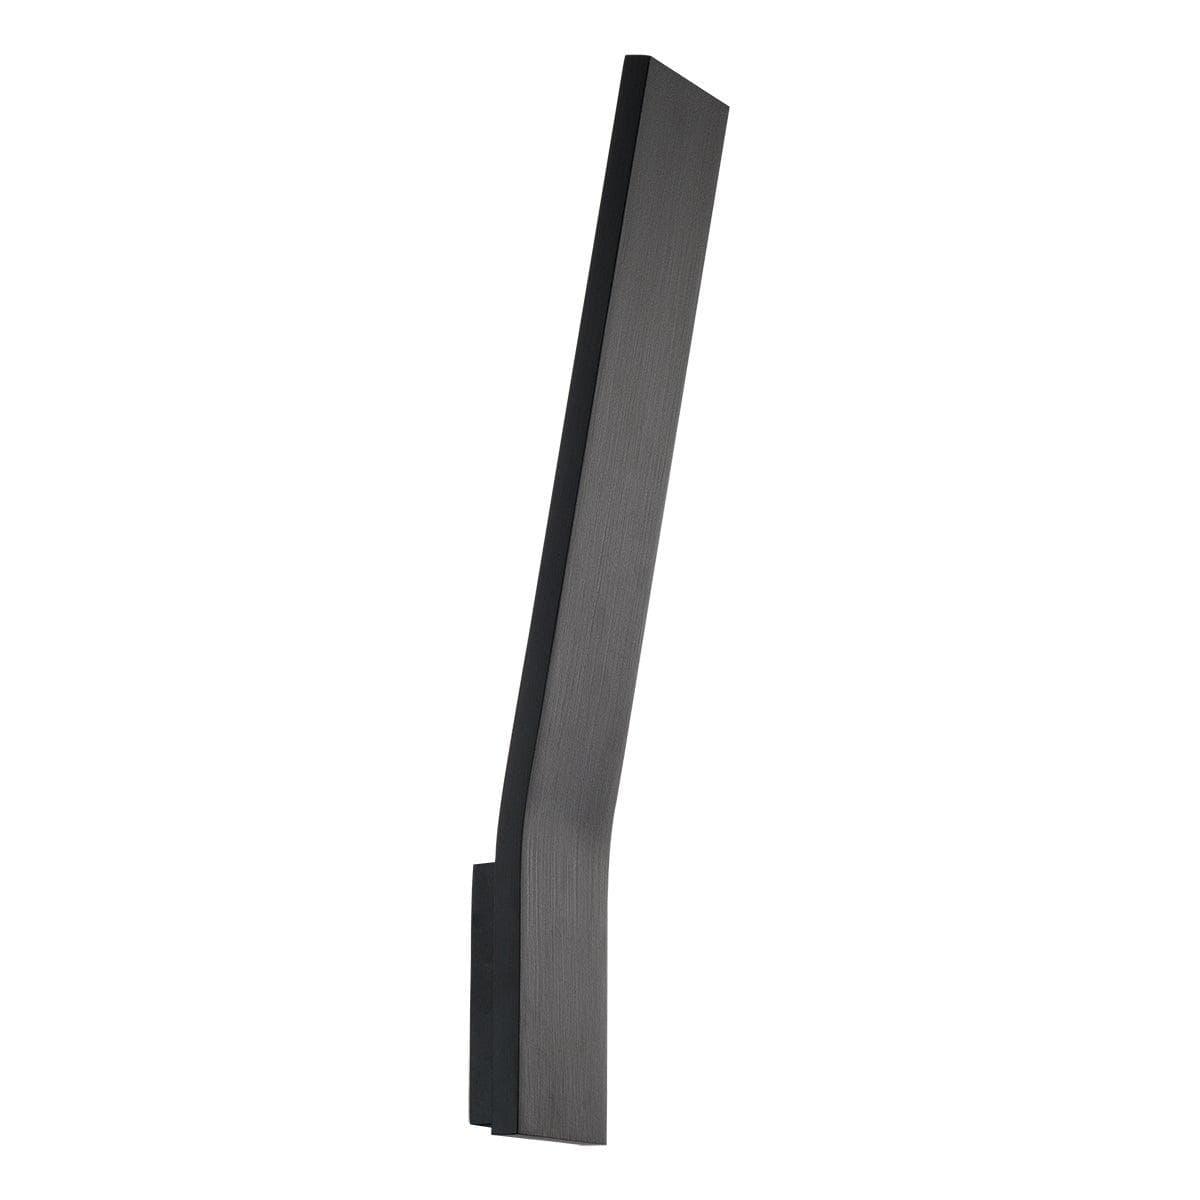 Modern Forms - Blade LED Wall Sconce - WS-11522-BK | Montreal Lighting & Hardware